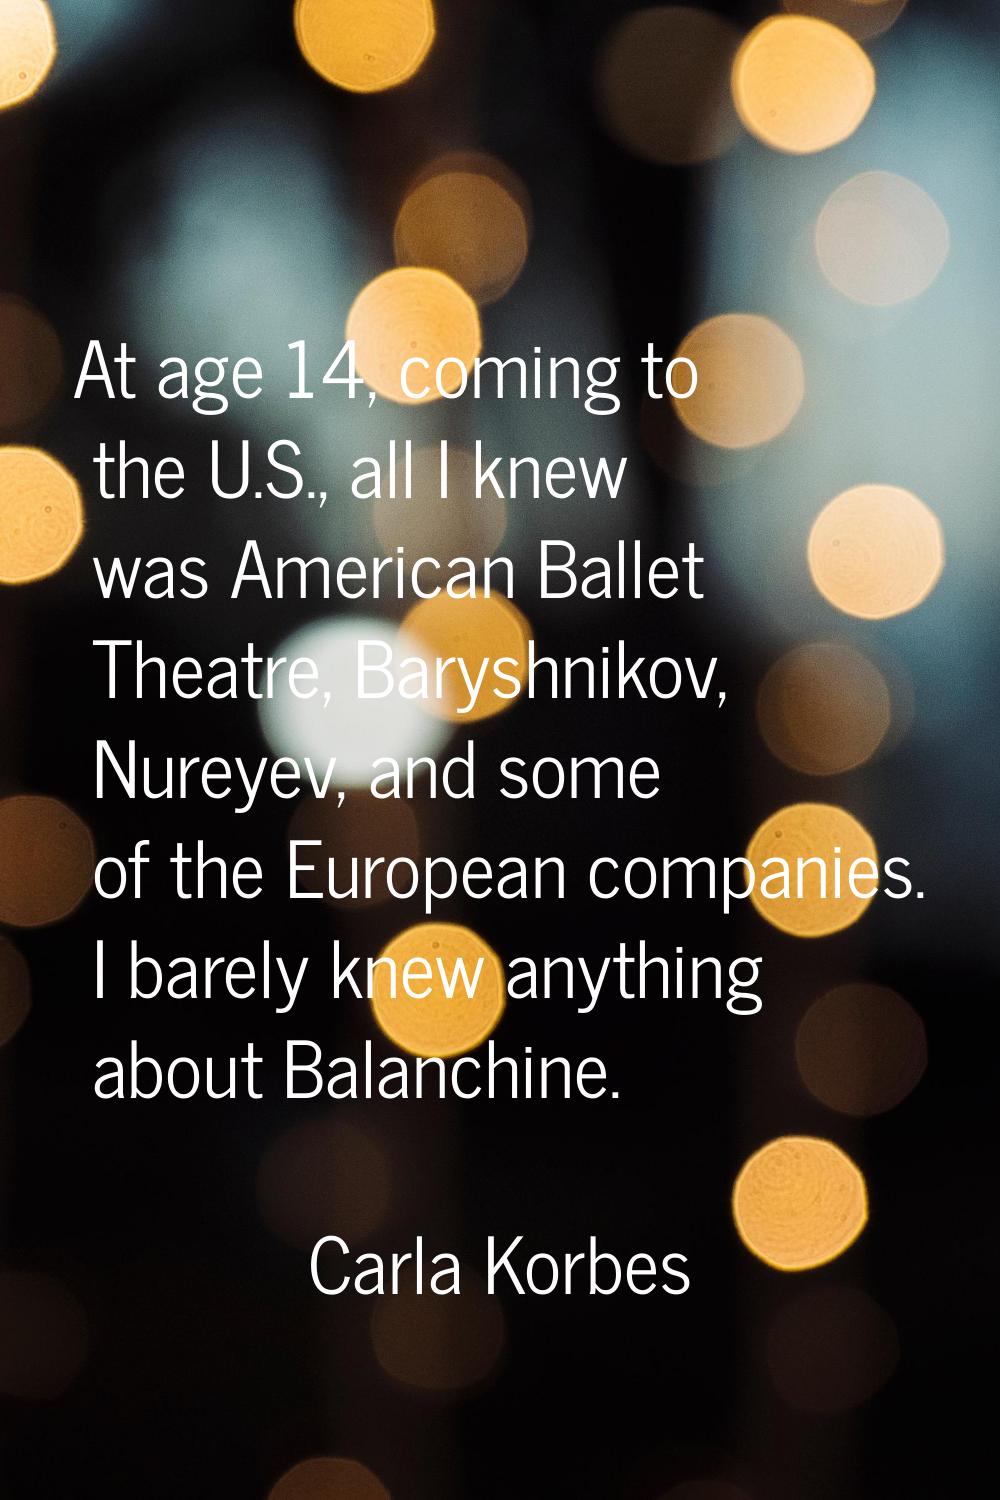 At age 14, coming to the U.S., all I knew was American Ballet Theatre, Baryshnikov, Nureyev, and so